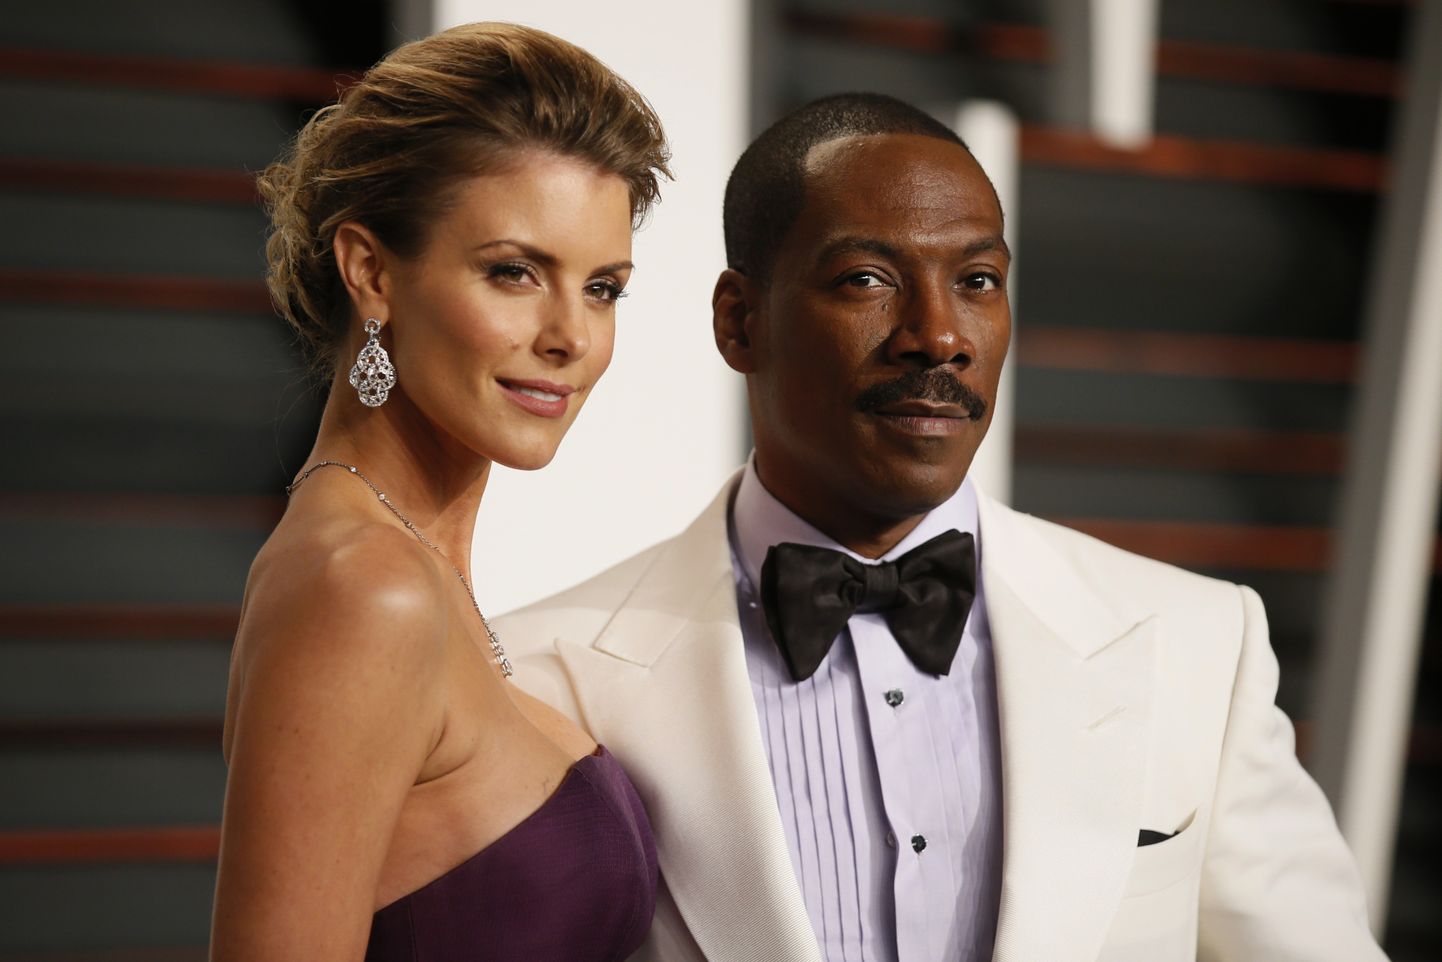 Comedian Eddie Murphy and Paige Butcher arrive at the 2015 Vanity Fair Oscar Party in Beverly Hills, California February 22, 2015.  REUTERS/Danny Moloshok (UNITED STATES  - Tags: ENTERTAINMENT) (VANITY FAIR-ARRIVALS)